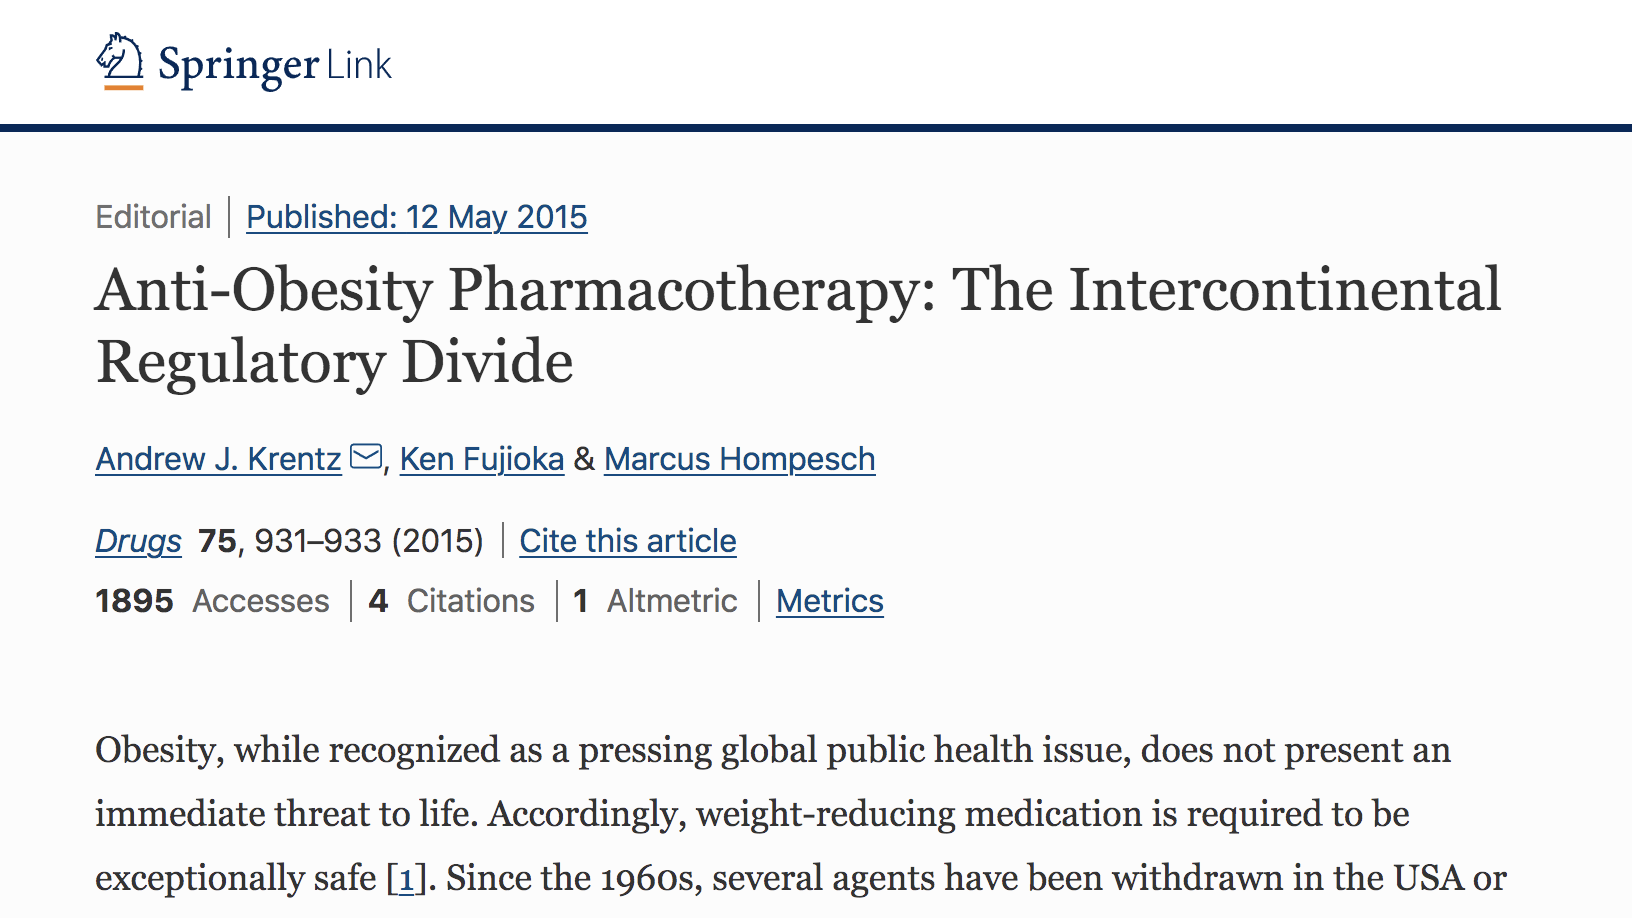 image of Anti-Obesity Pharmacotherapy: The Intercontinental Regulatory Divide